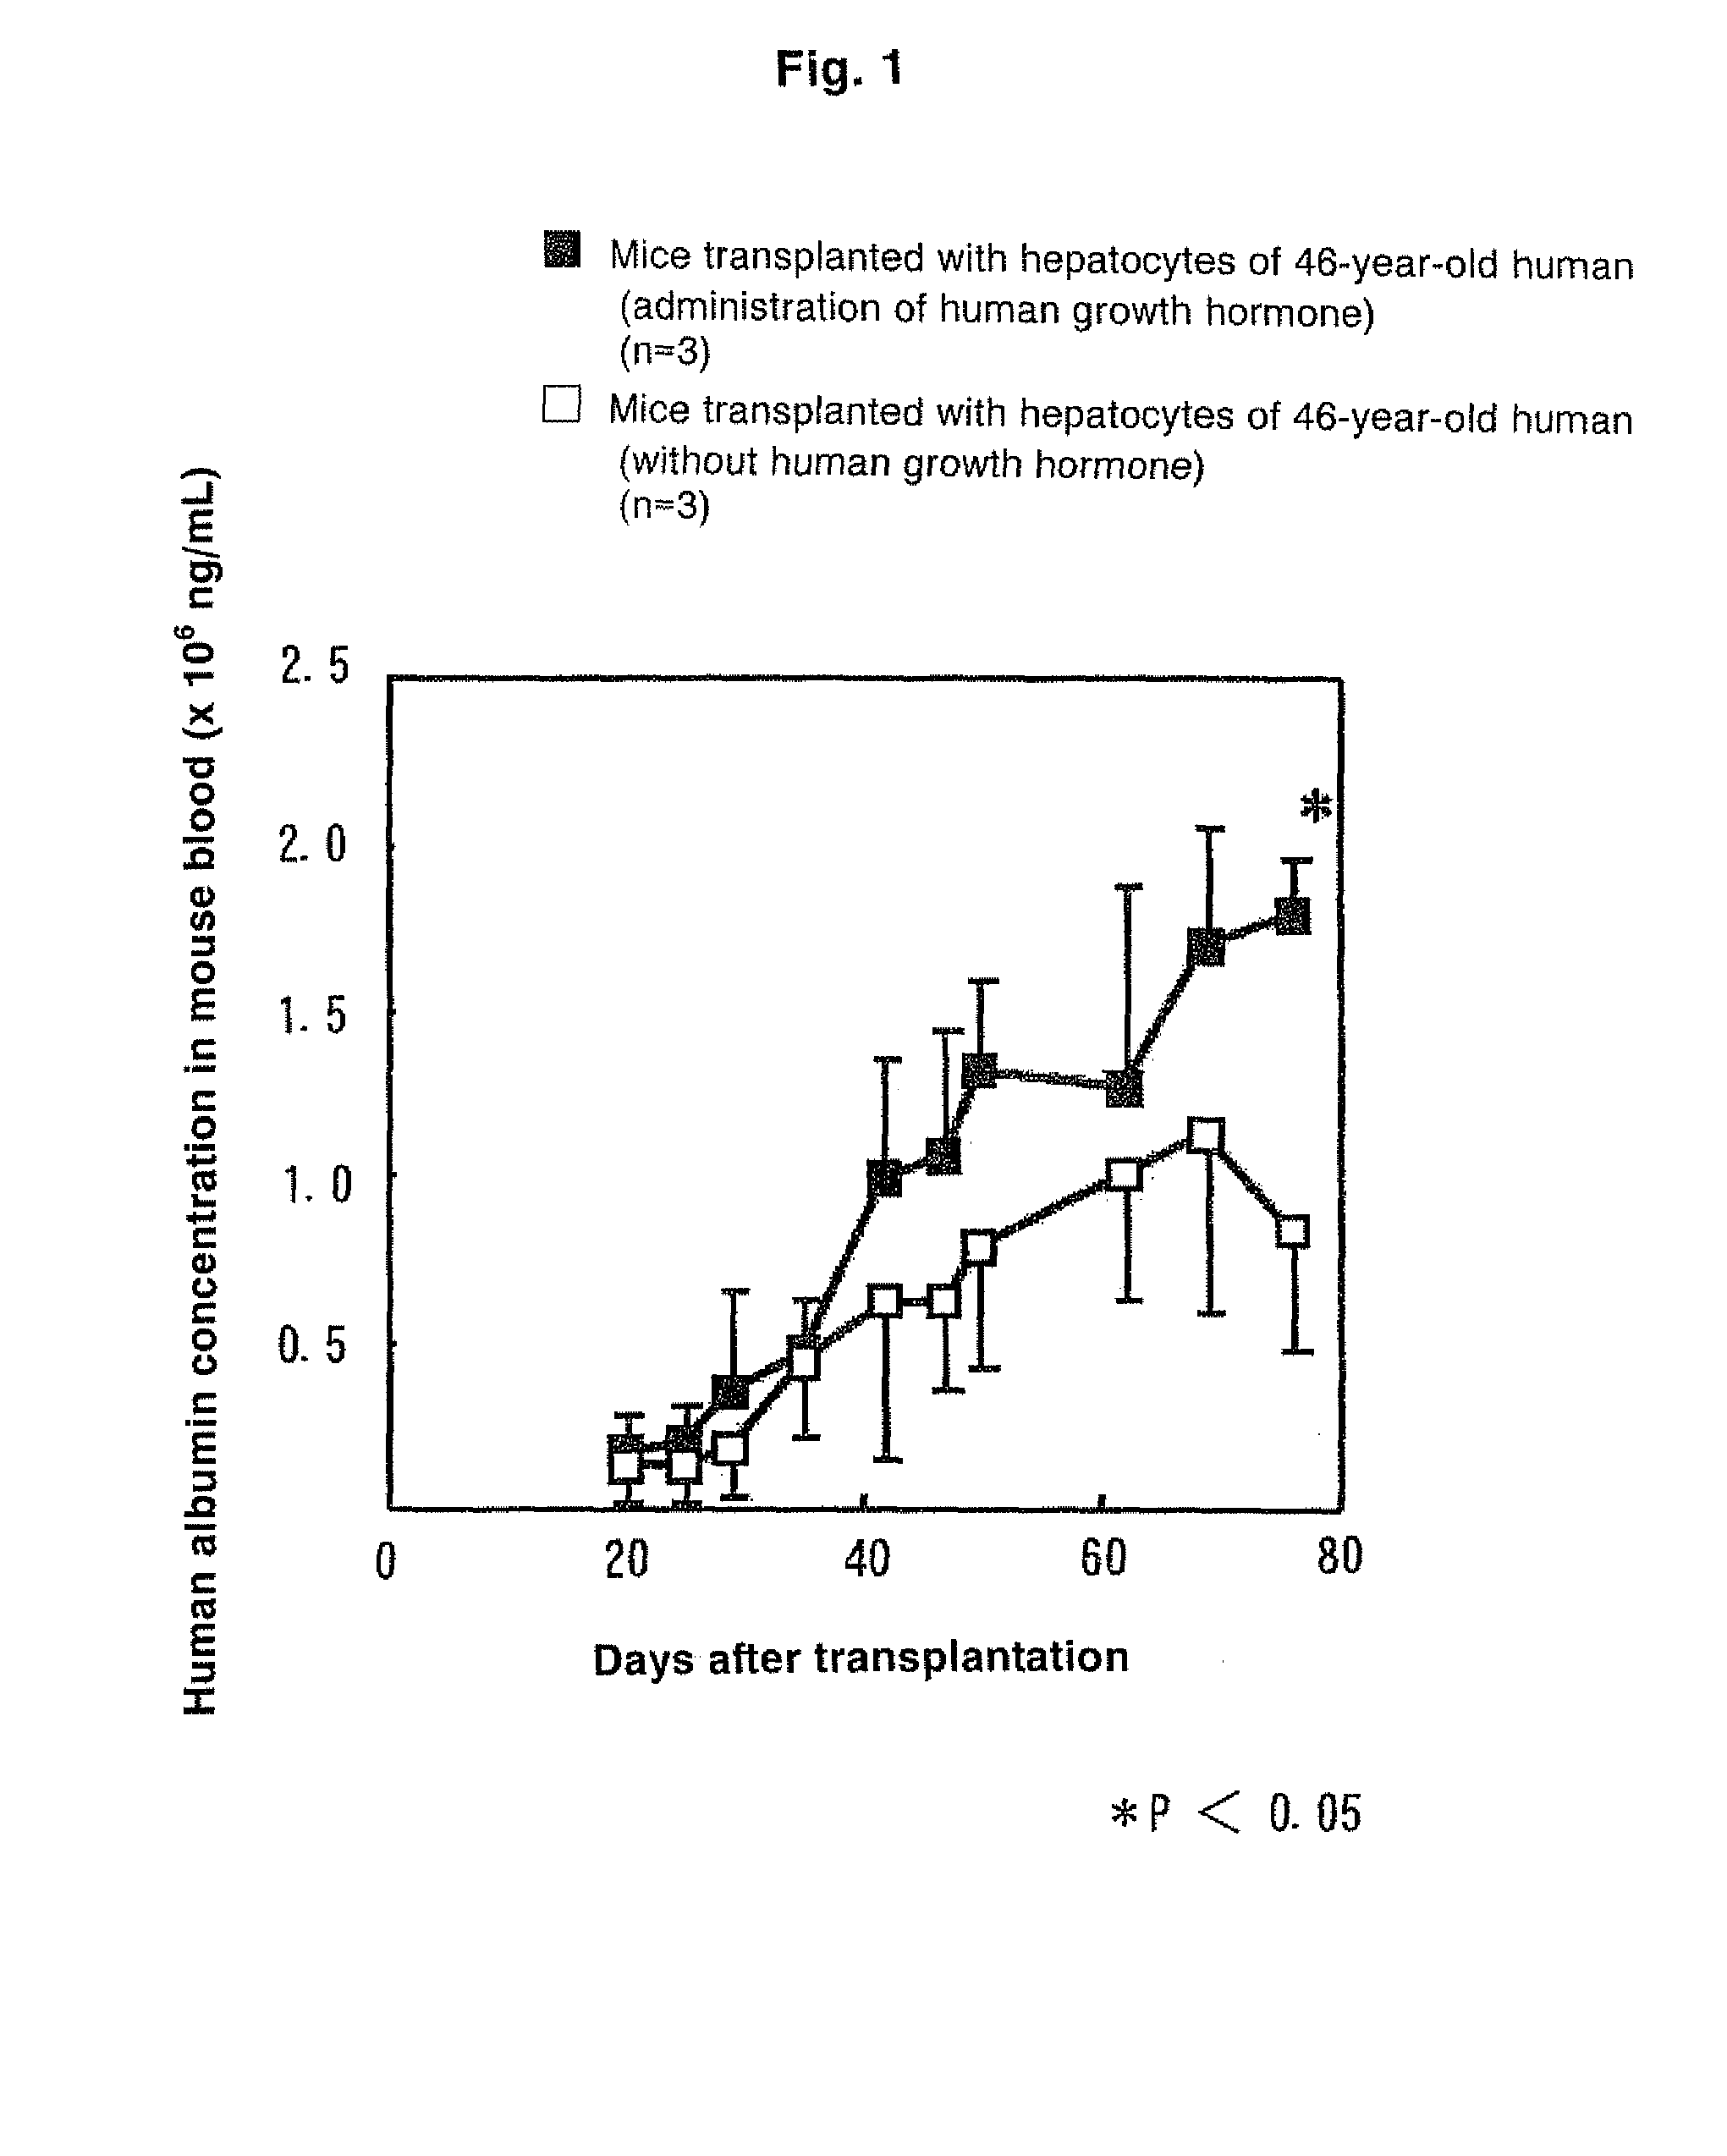 Method of treating mouse carrying human hepatocytes